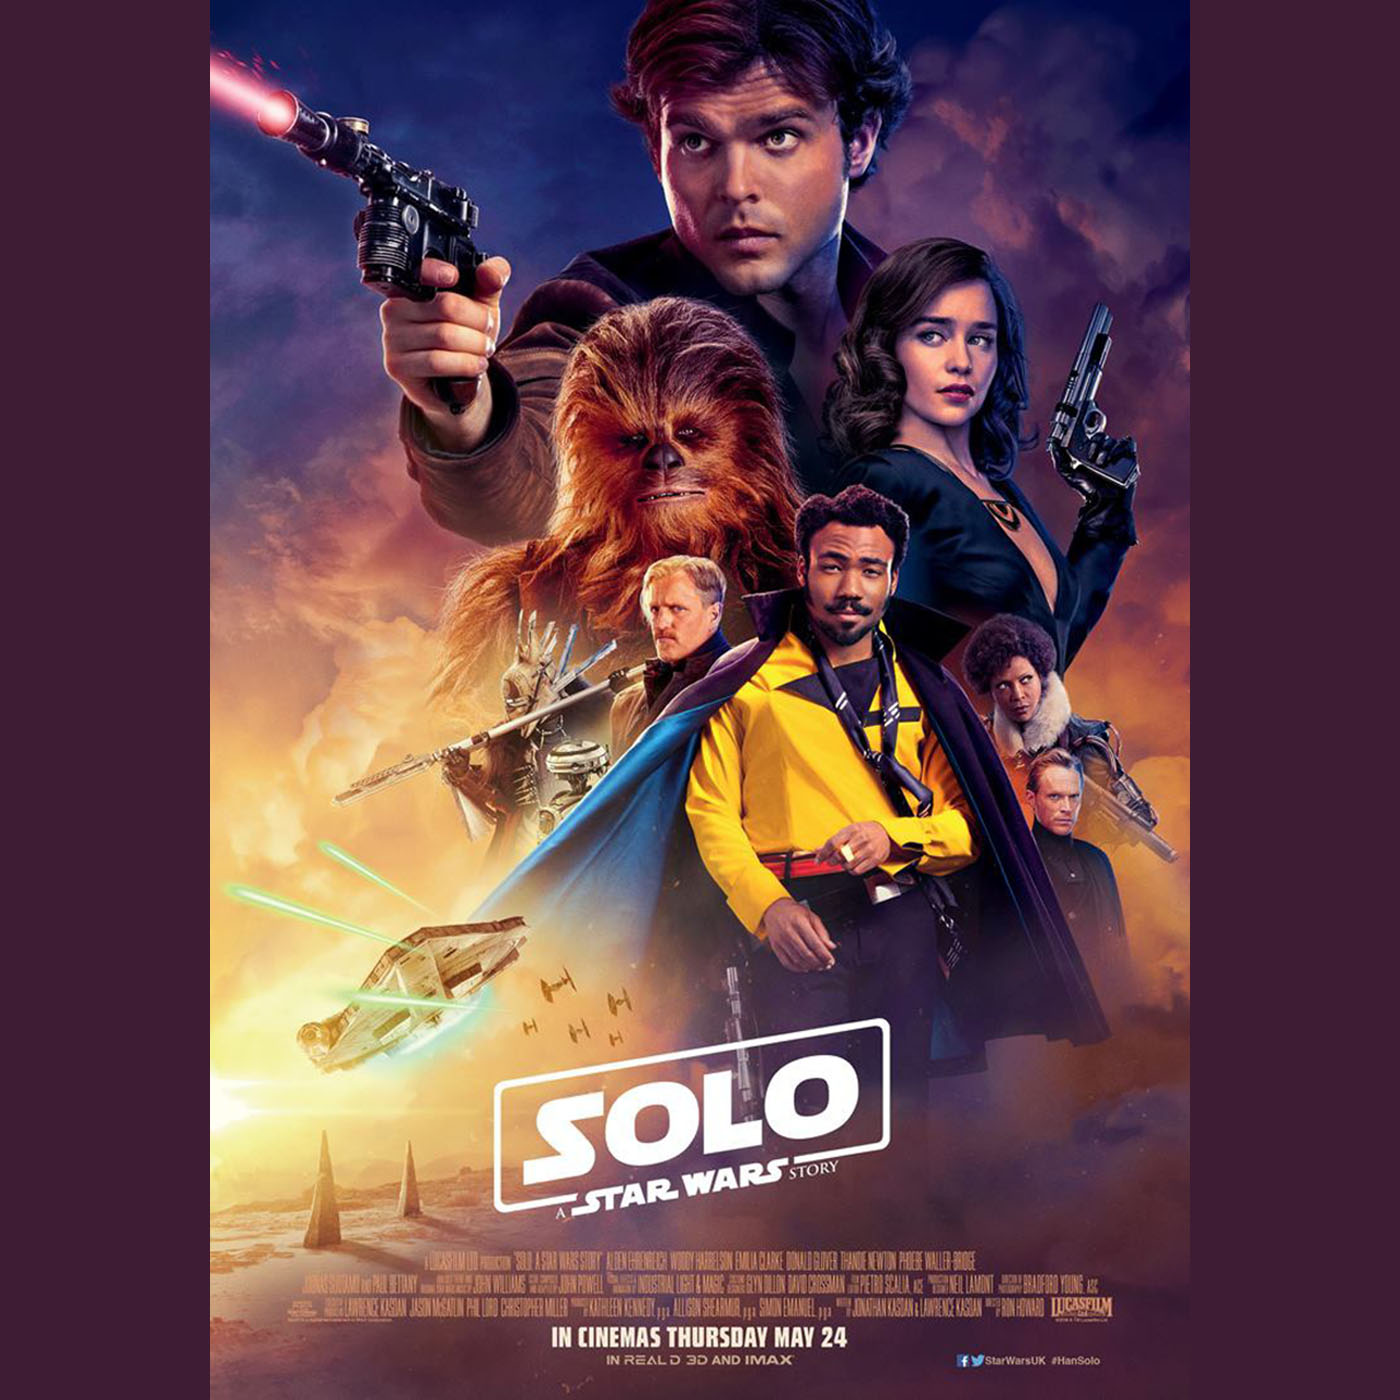 Episode #17: Solo: A Star Wars Story